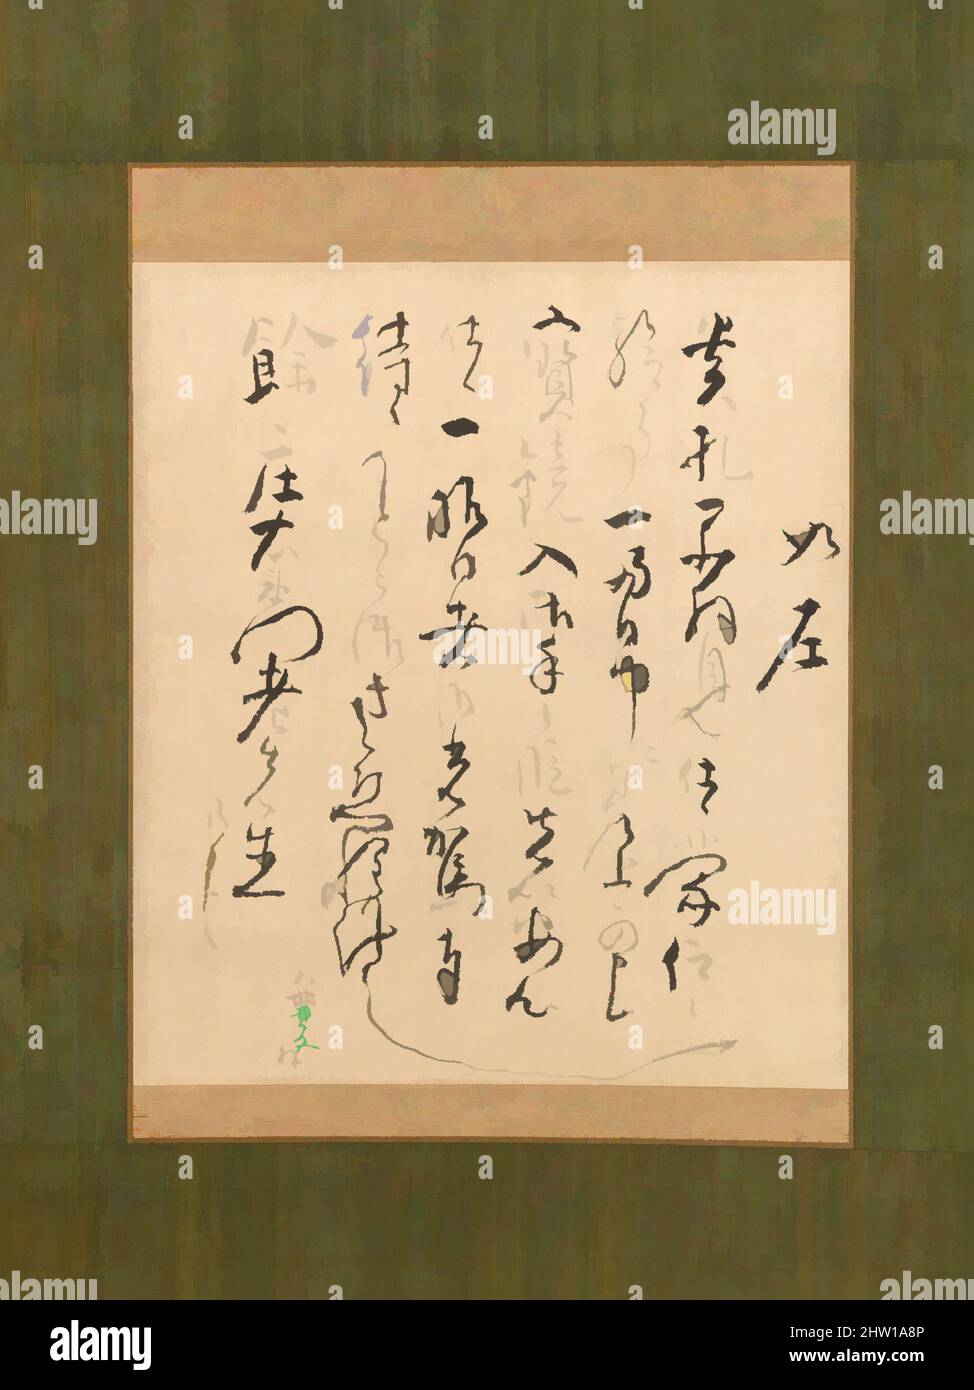 Art inspired by Letter Addressed to Yo Shōemon, Edo period (1615–1868), 18th century, Japan, Hanging scroll; ink on paper, Image: 9 5/16 × 8 1/8 in. (23.6 × 20.6 cm), Calligraphy, Classic works modernized by Artotop with a splash of modernity. Shapes, color and value, eye-catching visual impact on art. Emotions through freedom of artworks in a contemporary way. A timeless message pursuing a wildly creative new direction. Artists turning to the digital medium and creating the Artotop NFT Stock Photo